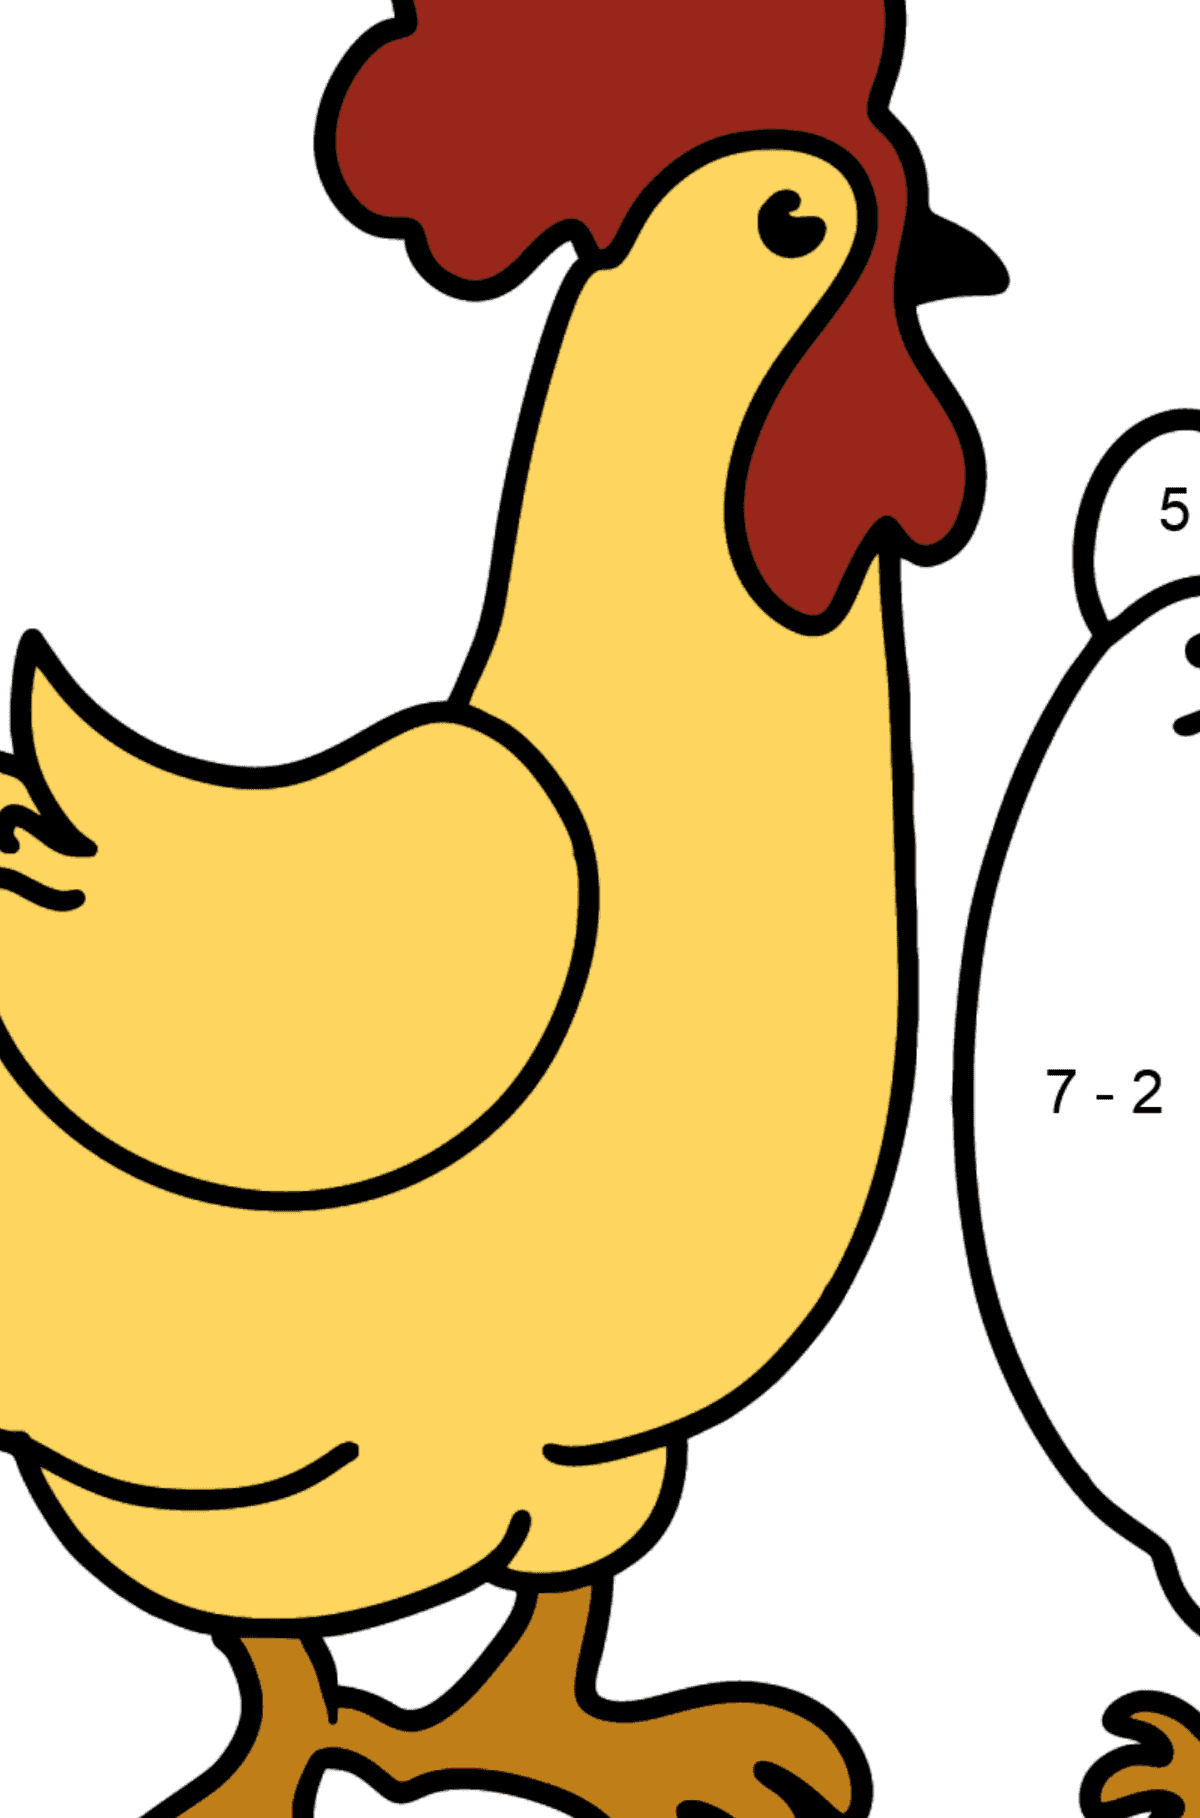 Rooster and Hen coloring page - Math Coloring - Subtraction for Kids